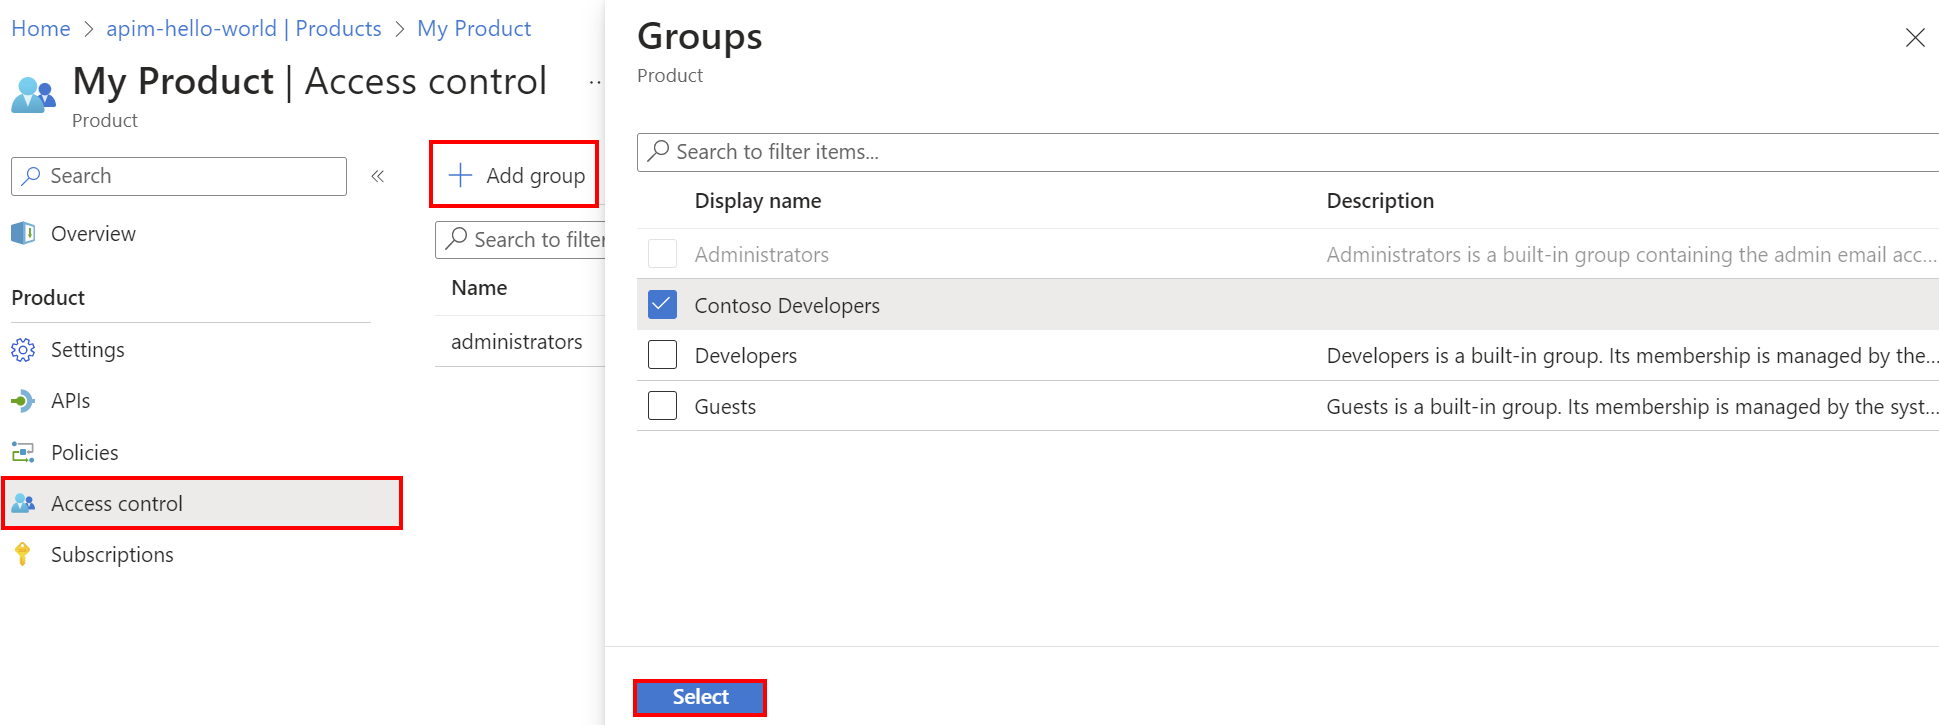 Screenshot of adding a group to a product in the portal.